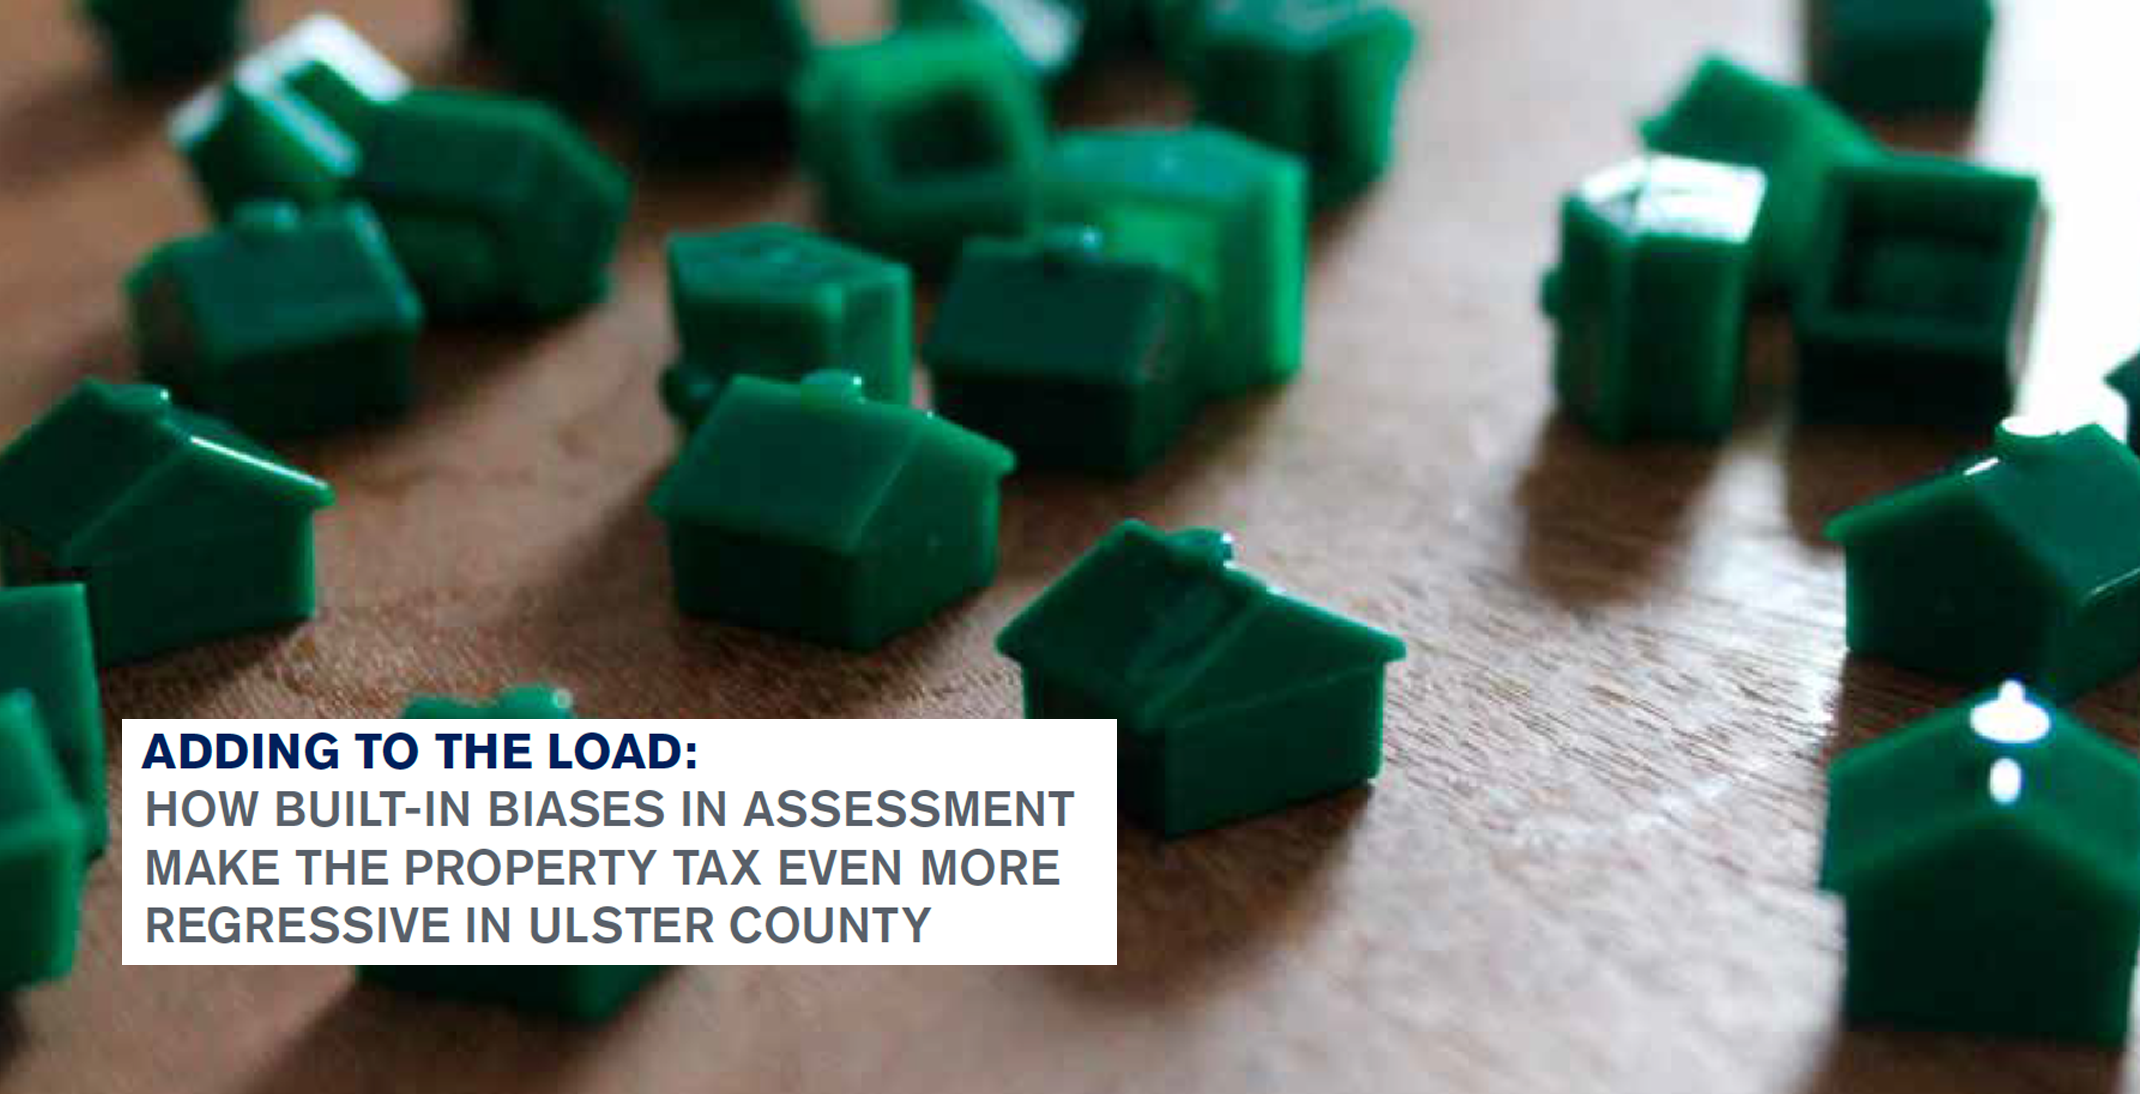 ADDING TO THE LOAD: HOW BUILT-IN BIASES IN ASSESSMENT MAKE THE PROPERTY TAX EVEN MORE REGRESSIVE IN ULSTER COUNTY